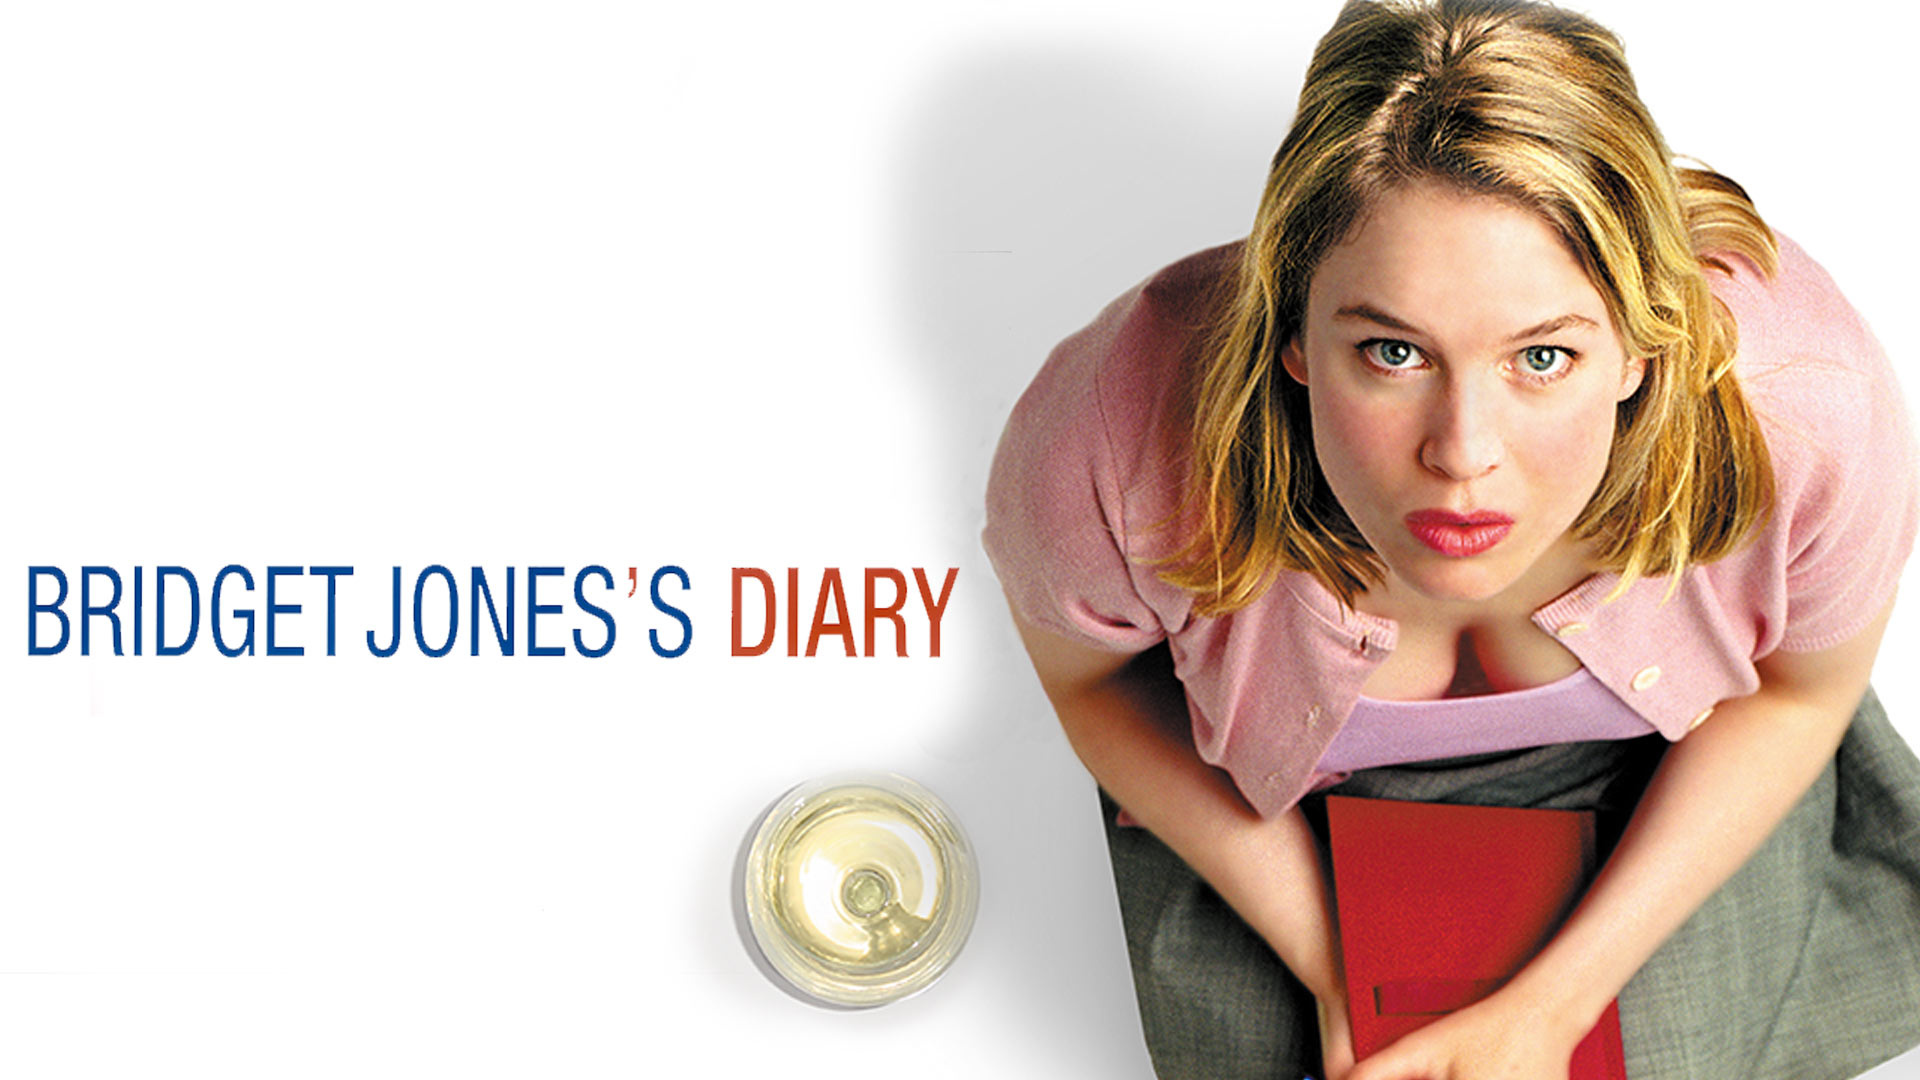 Bridget Jones's Diary, Diary entries, Love and laughter, Quirky and relatable, 1920x1080 Full HD Desktop